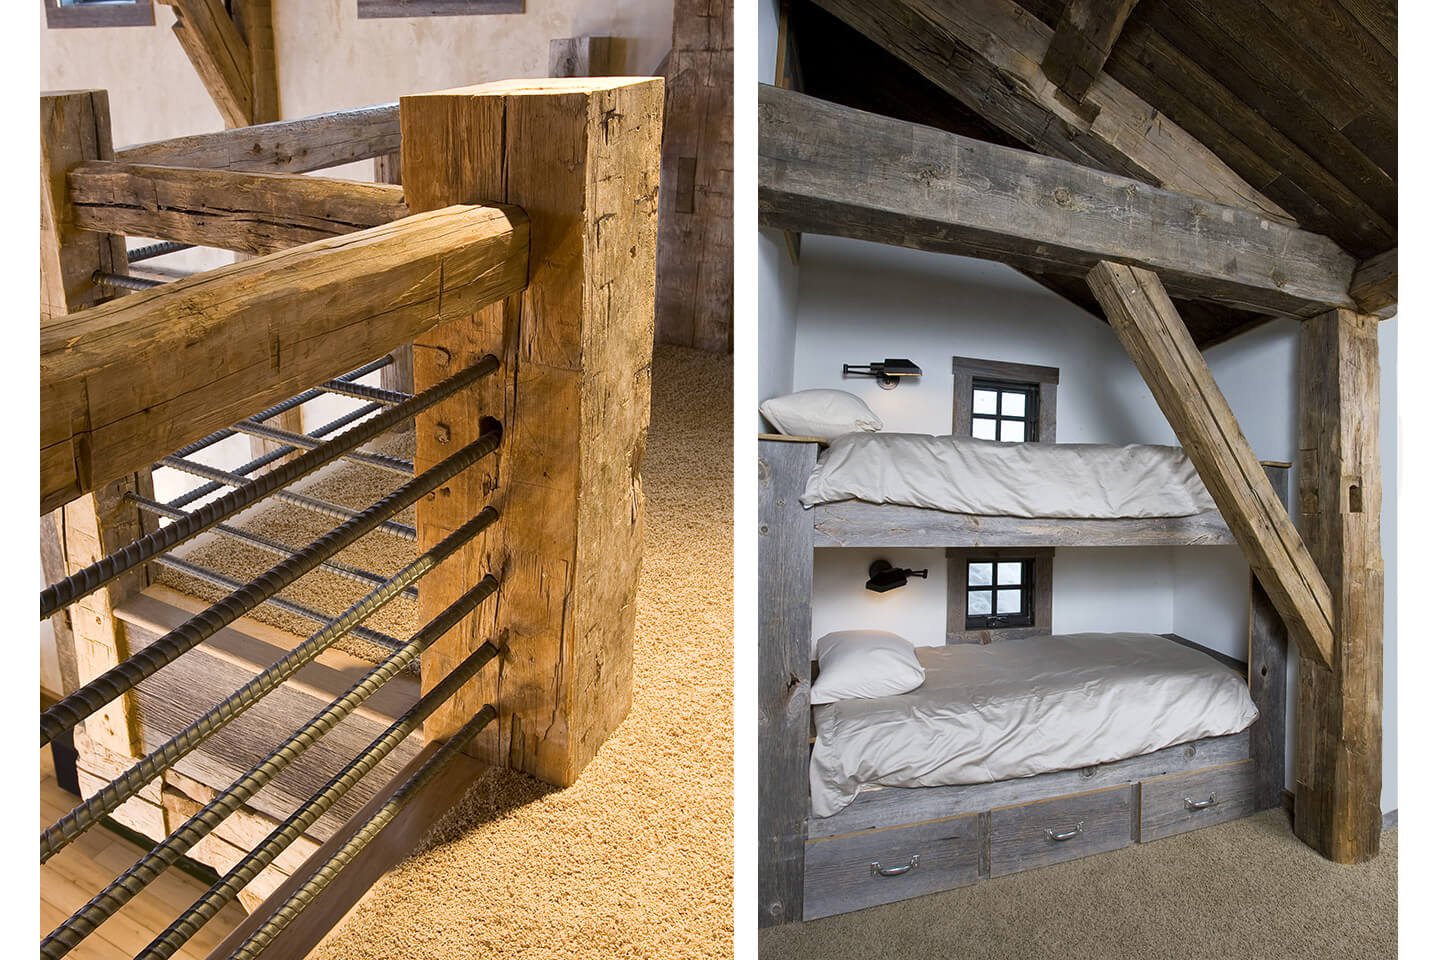 Staircase with hand-hewn logs and bunk beds area